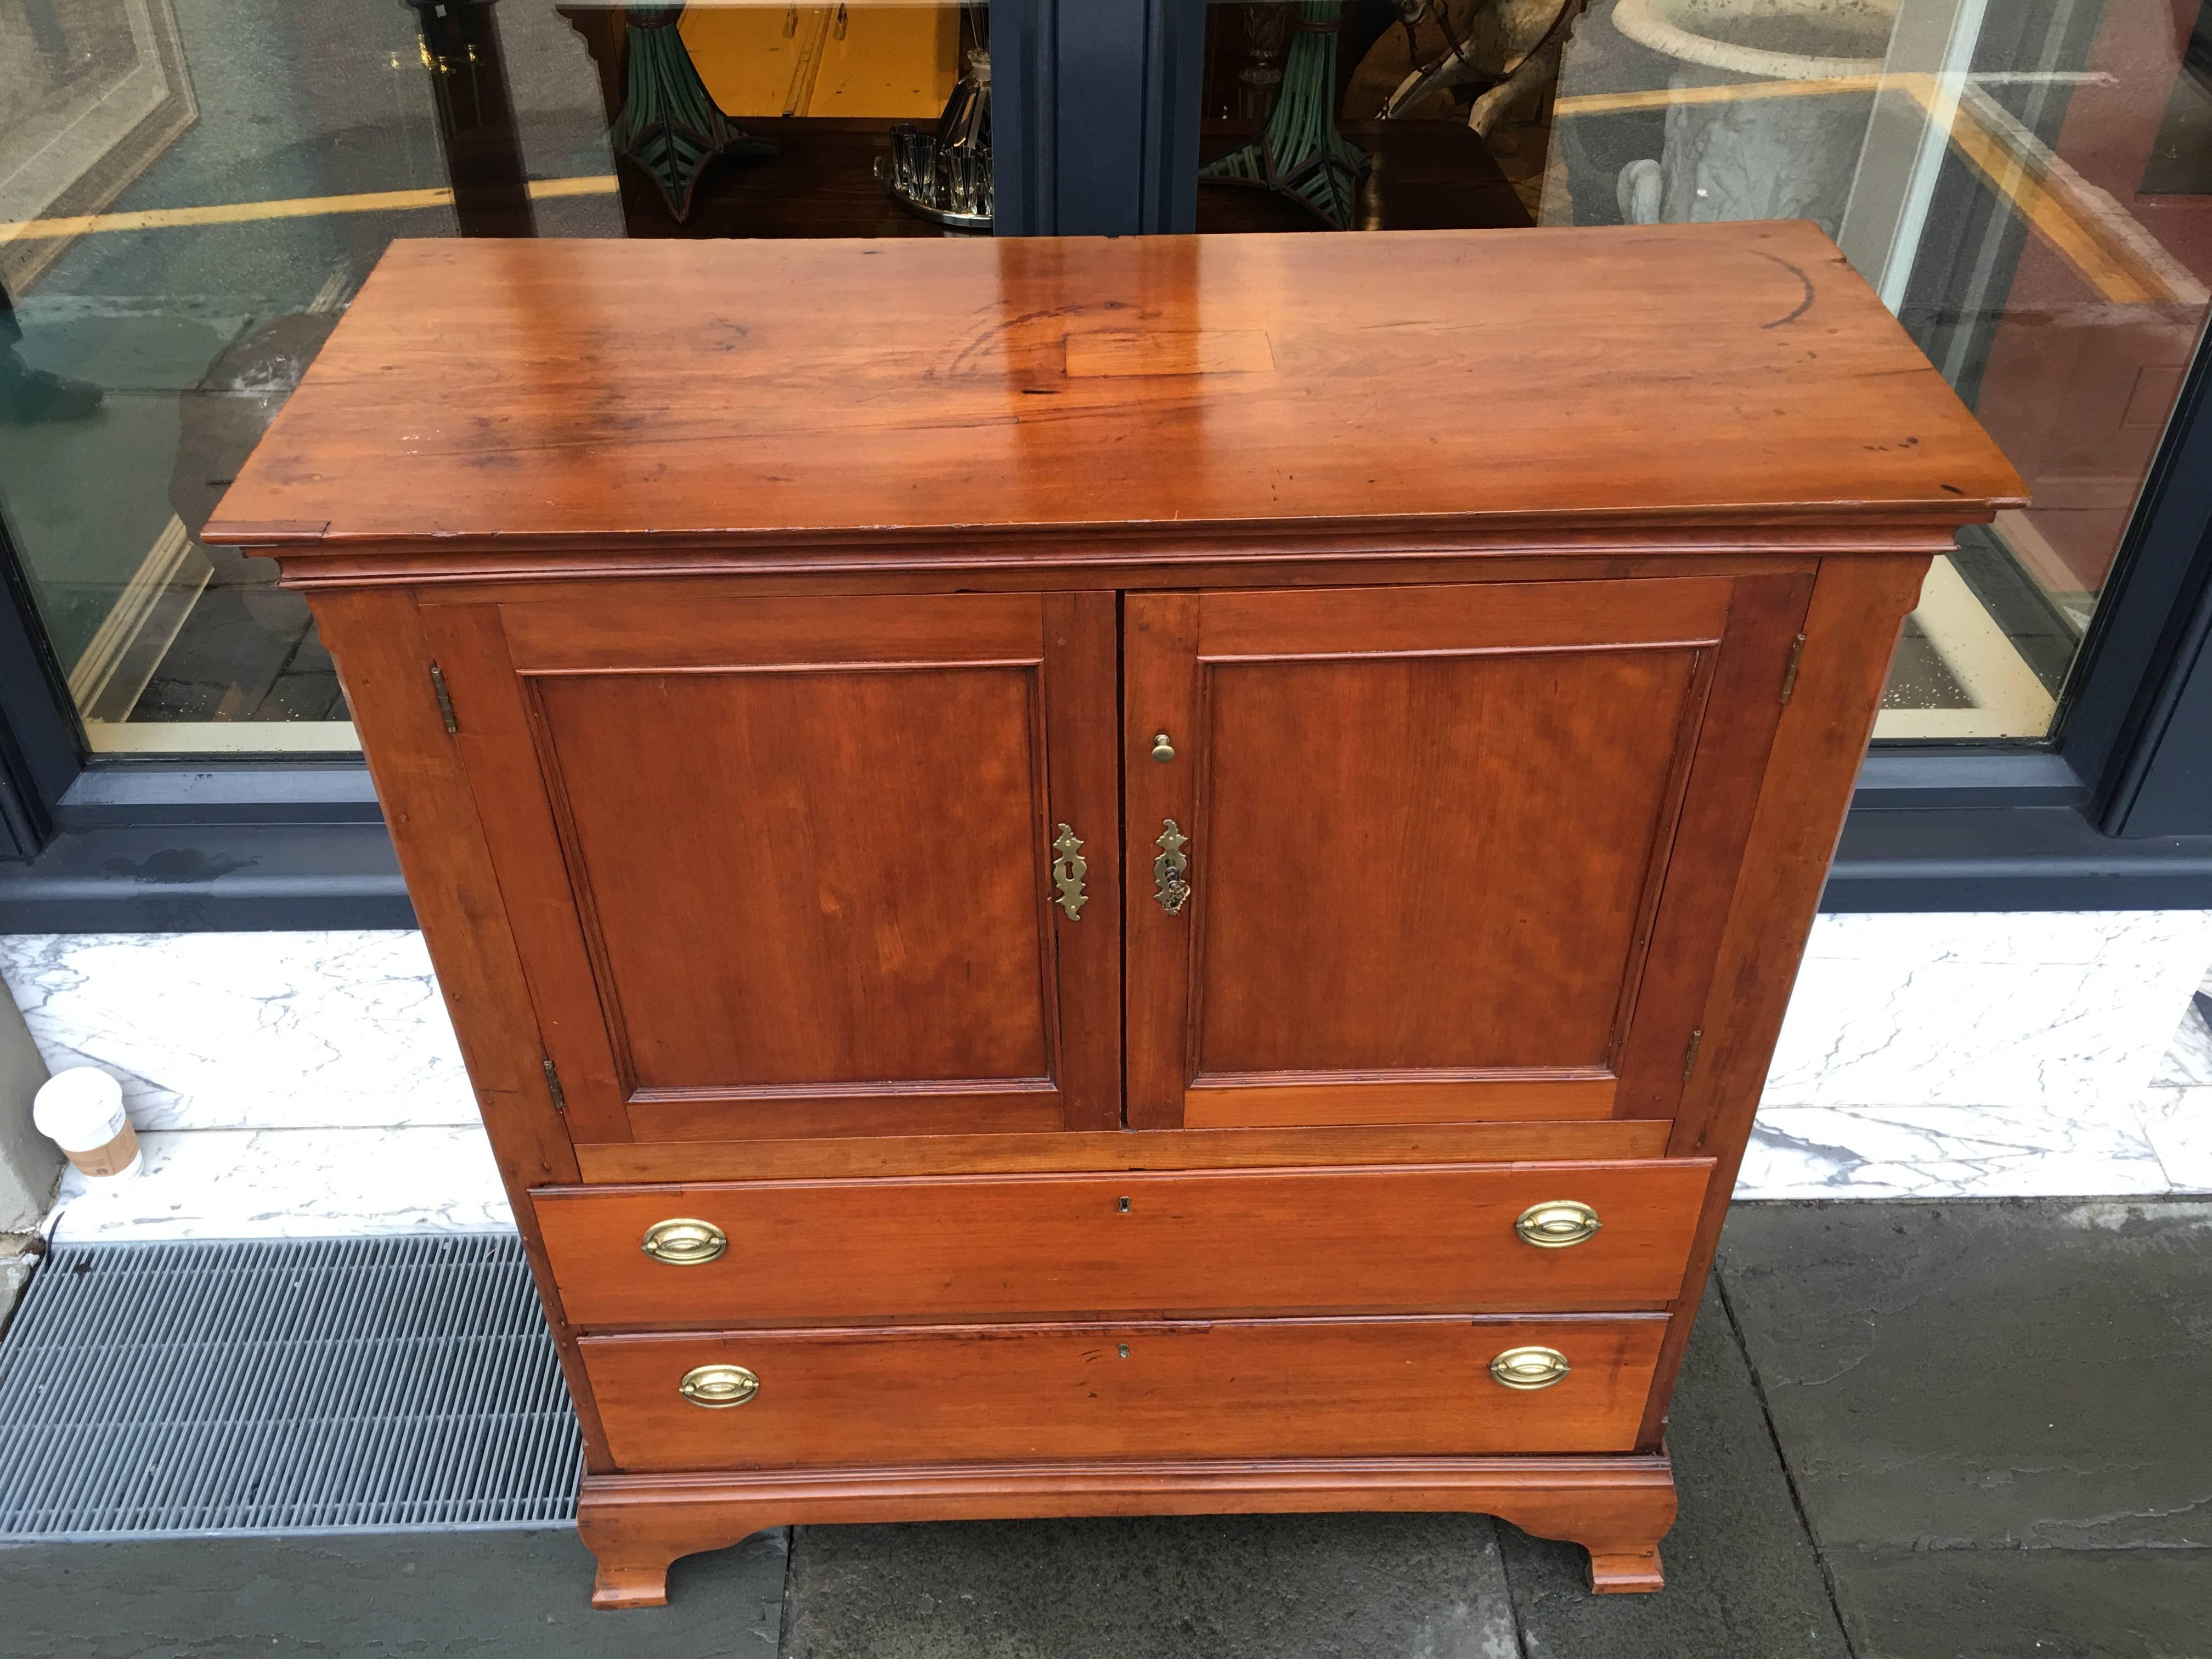 Very unique size Southern American cherry linen press. Great bracket foot with two drawers and small top or (press section).